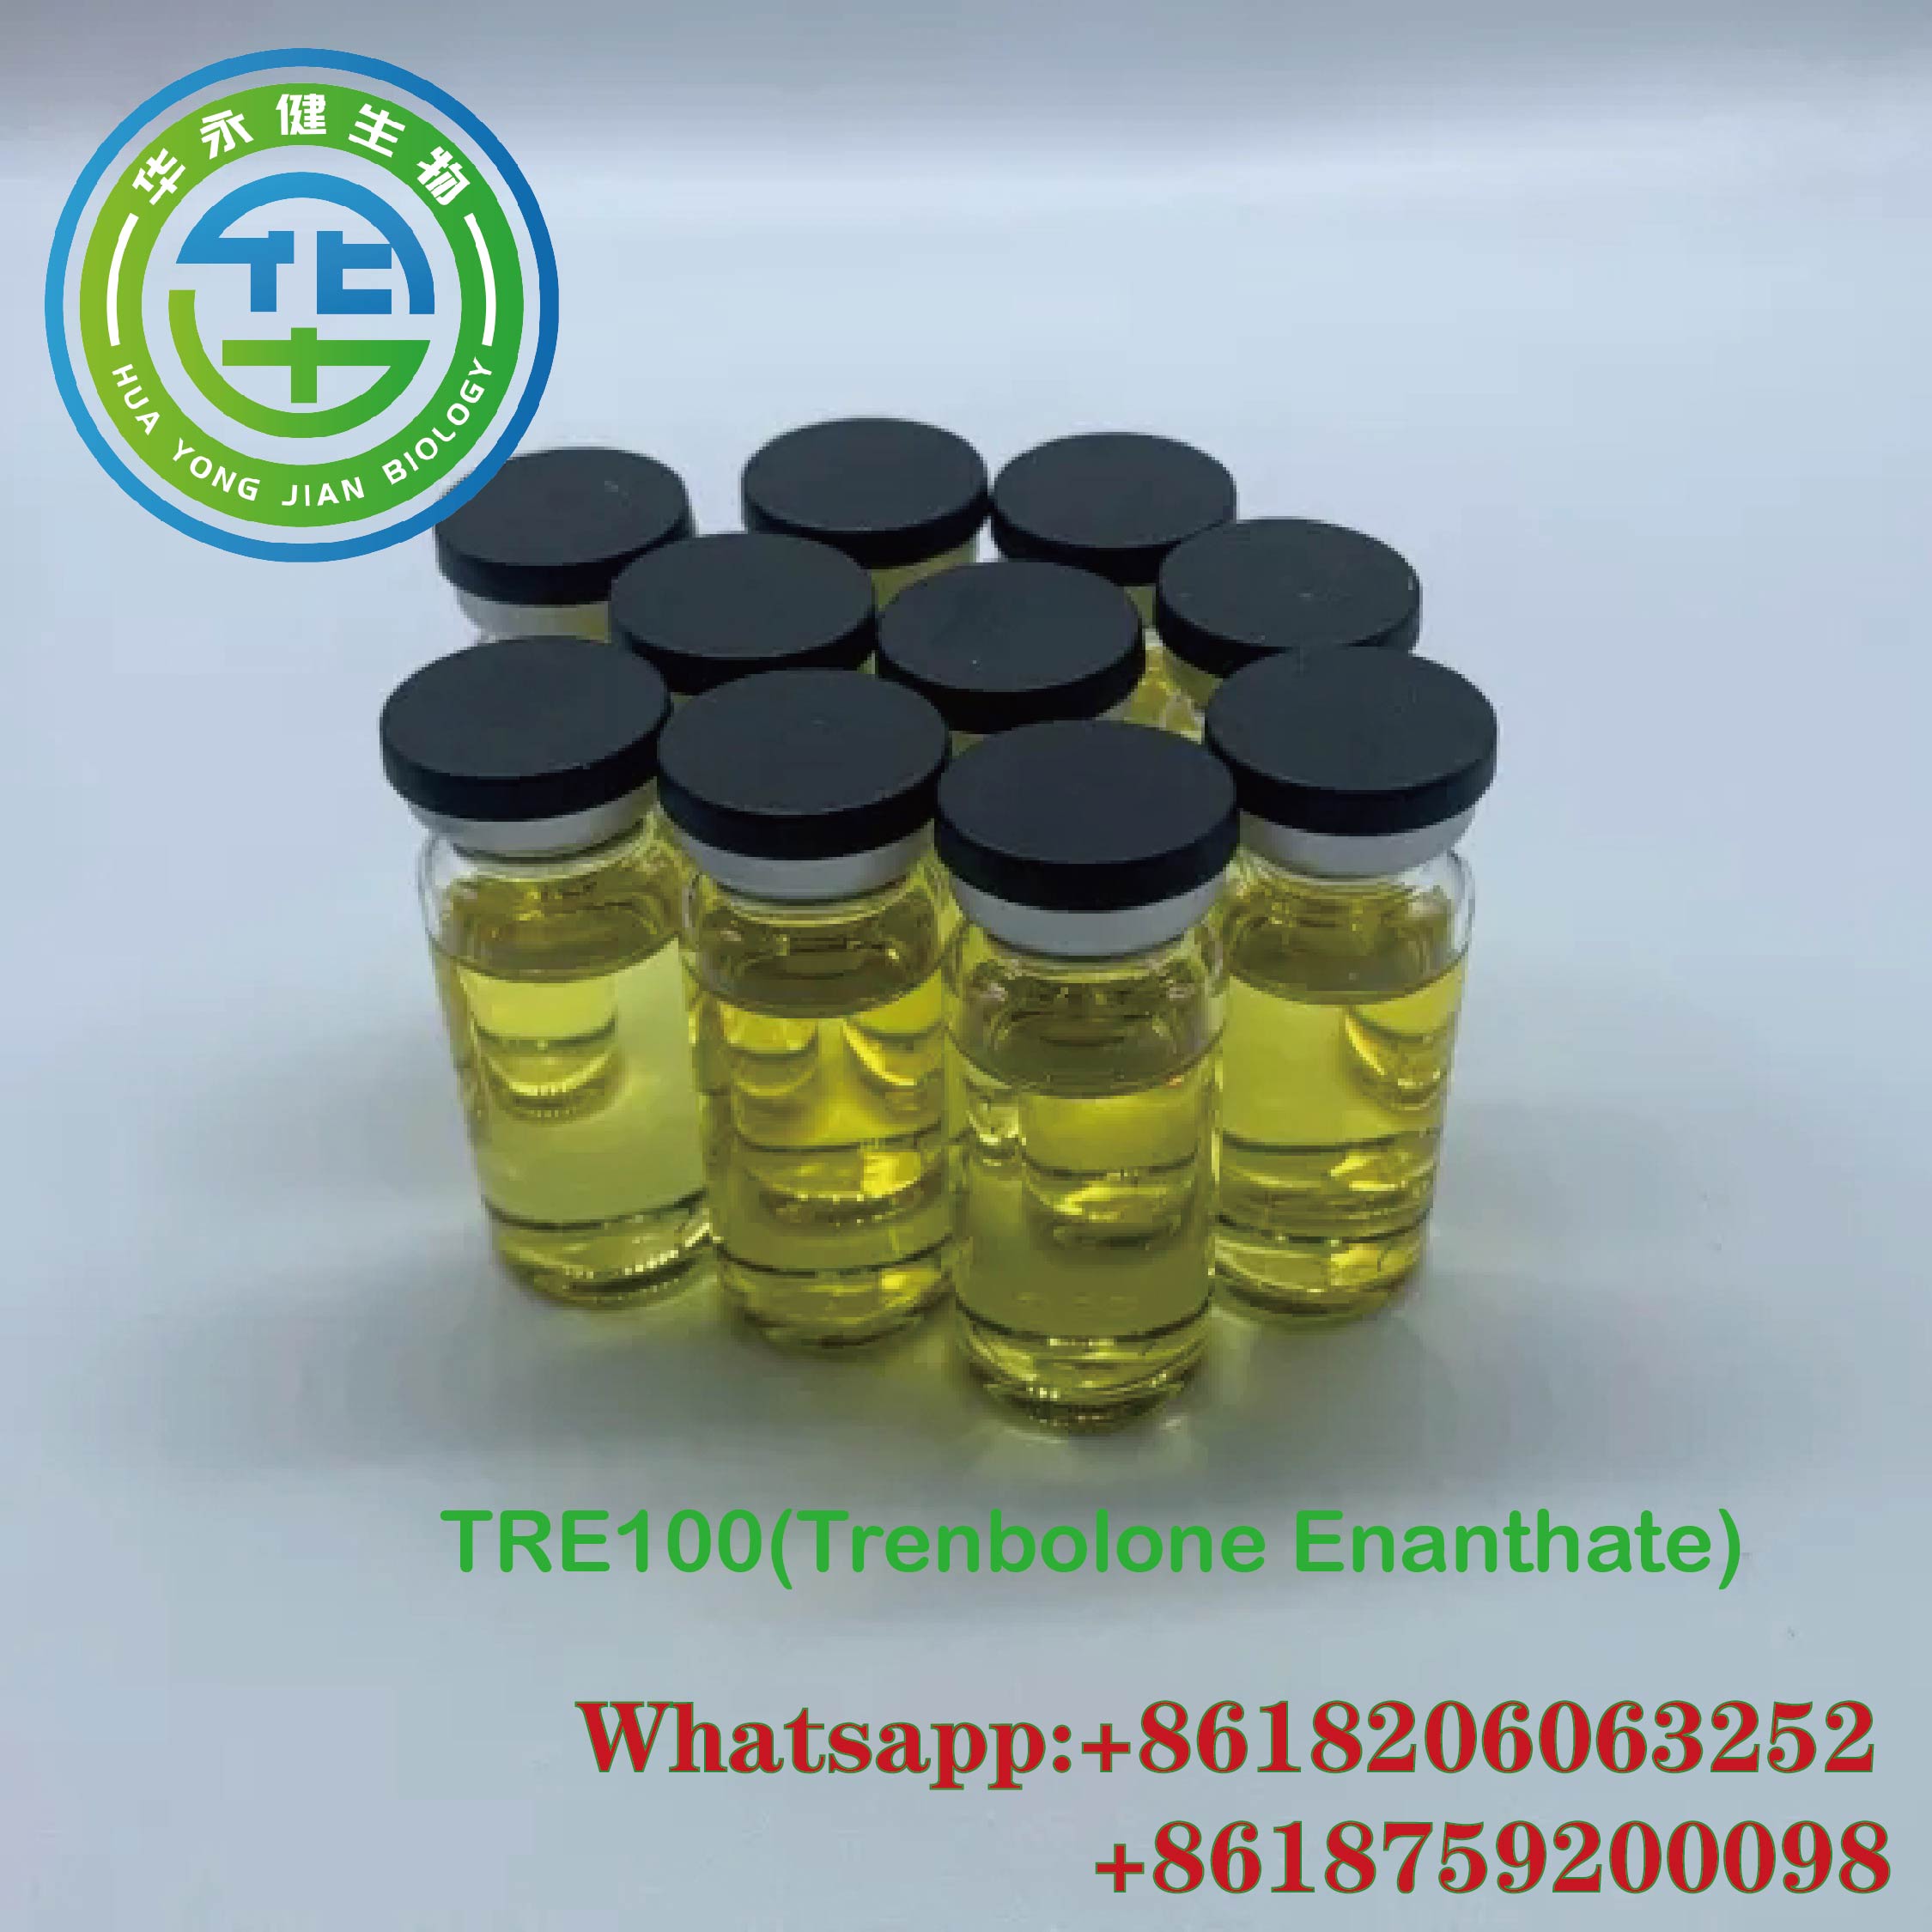 Trenbolone Enanthate100 Injectable Anabolic Steroids TRE100 Bodybuilding Liquid Oil 10ml/Bottle